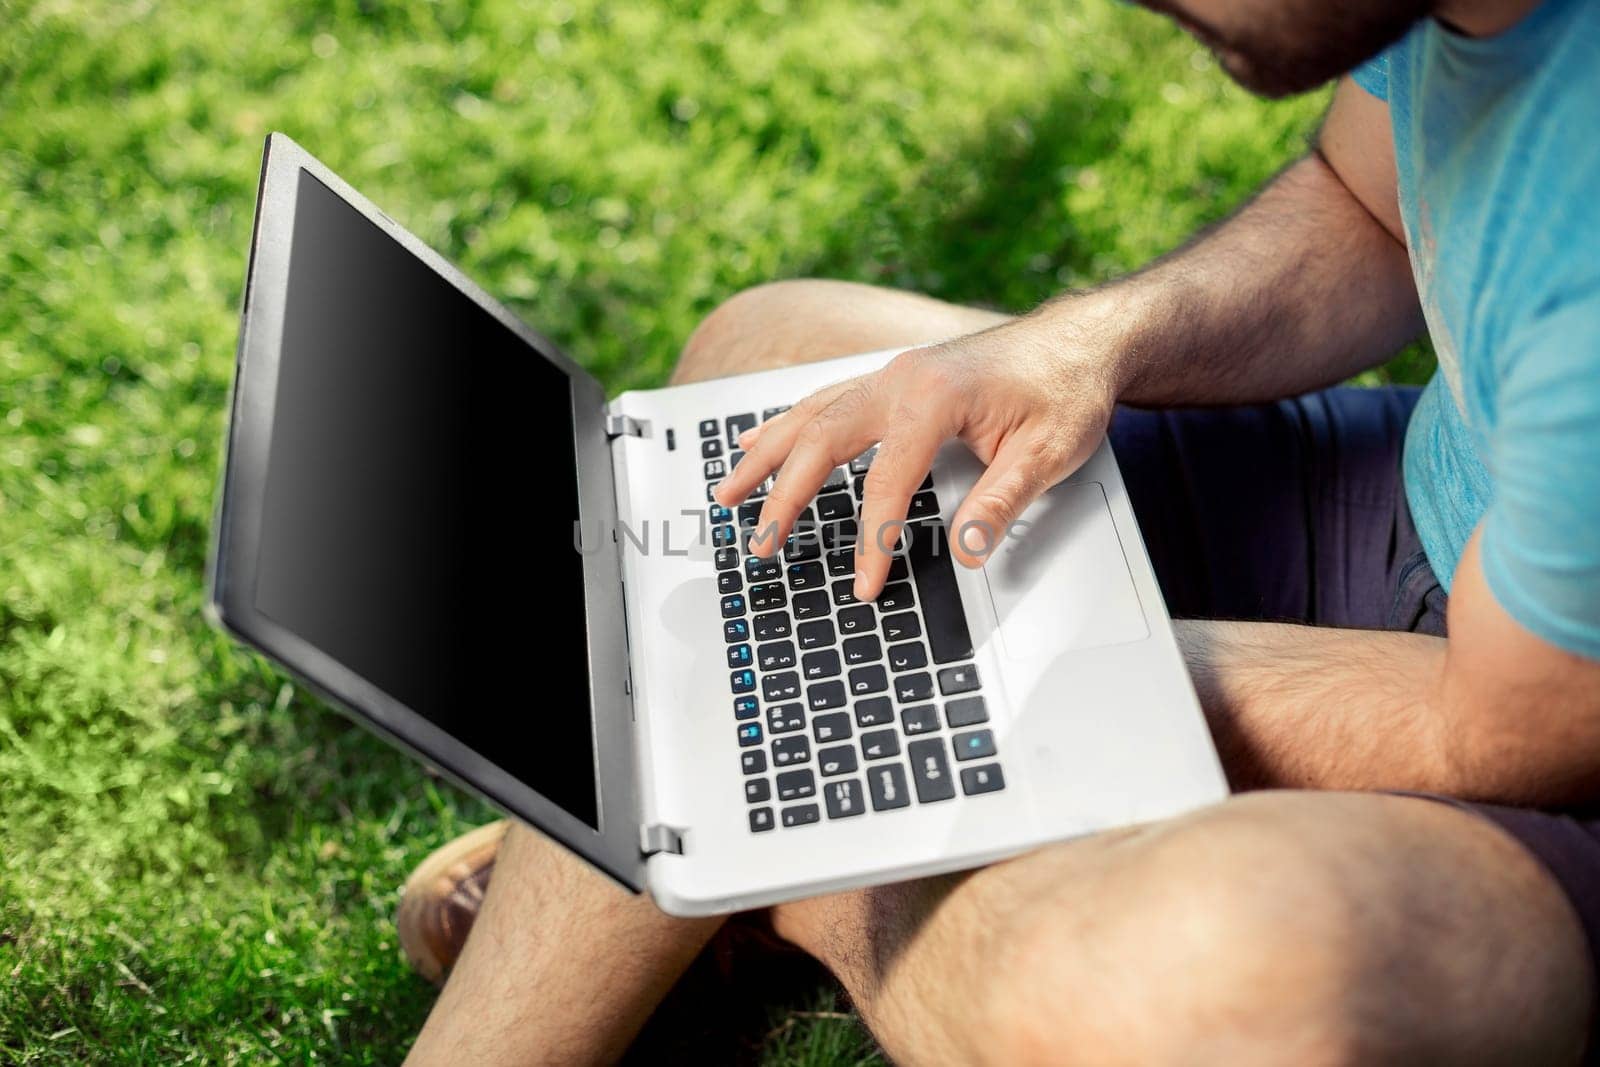 Top view male hands using notebook outdoors in urban setting while typing on keyboard, businessman freelancer working on computer while sitting on city park bench, tourist working on laptop, filter